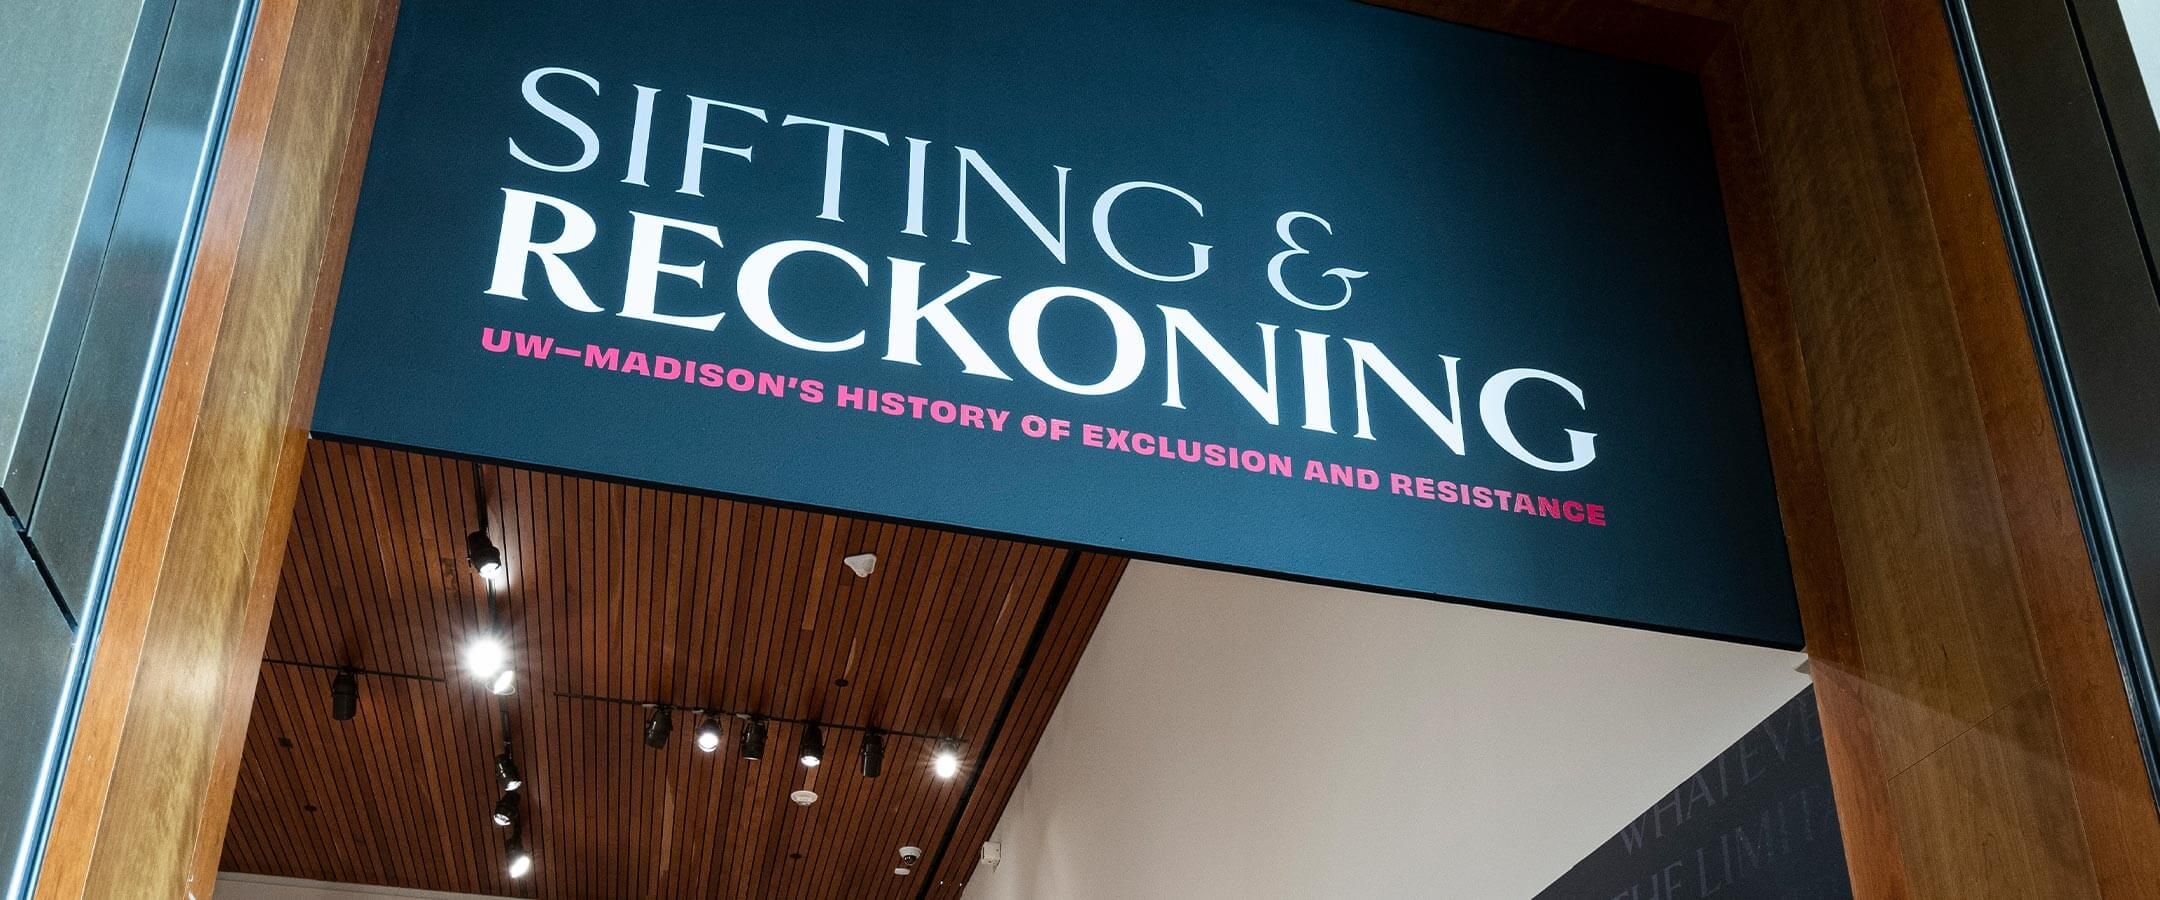 Sifting and Reckoning exhibit entrance